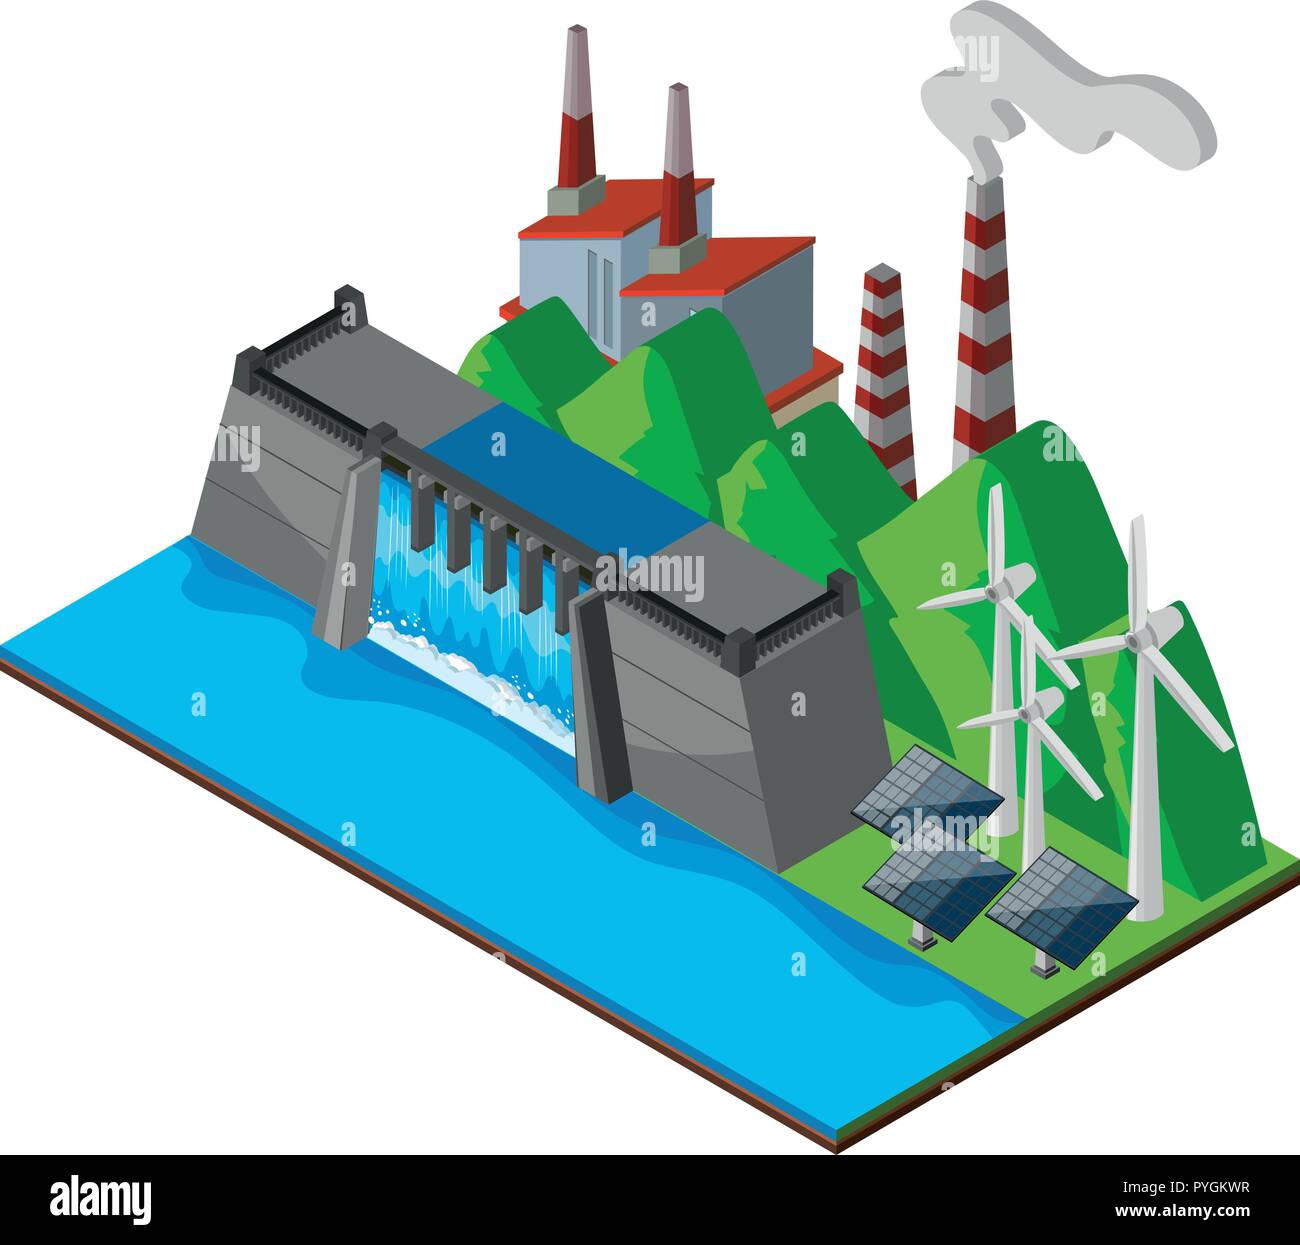 Dam and power plant near the lake illustration Stock Vector